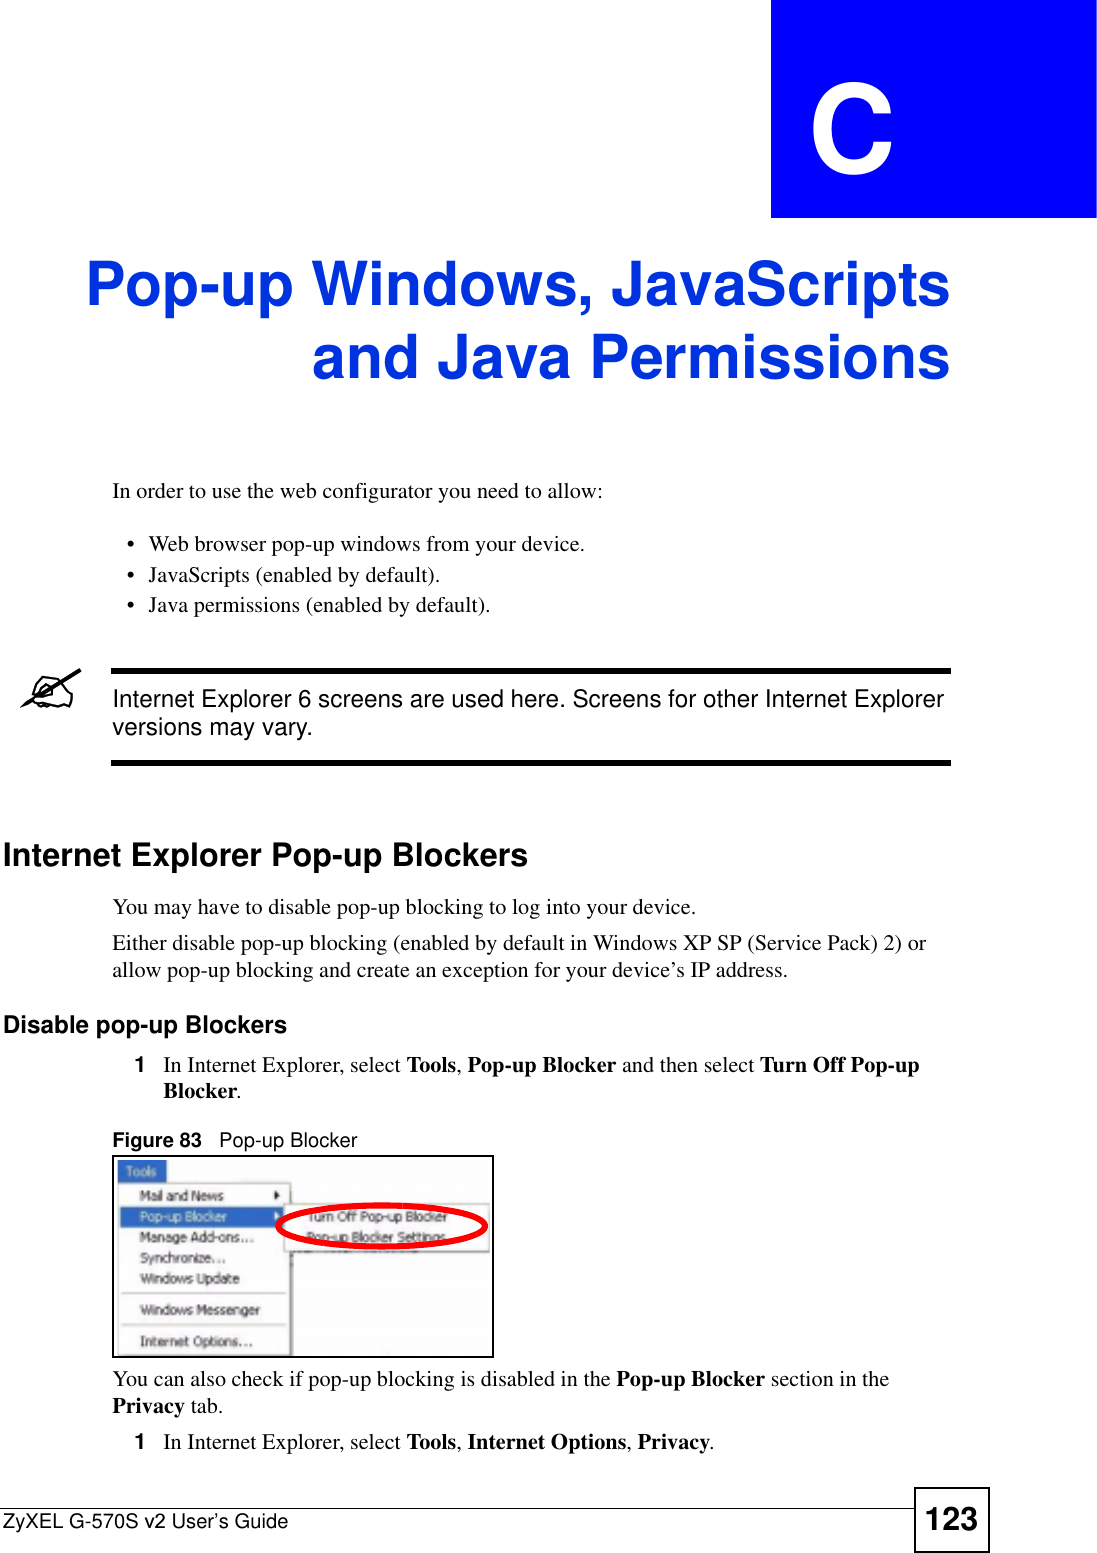 ZyXEL G-570S v2 User’s Guide 123APPENDIX  C Pop-up Windows, JavaScriptsand Java PermissionsIn order to use the web configurator you need to allow:• Web browser pop-up windows from your device.• JavaScripts (enabled by default).• Java permissions (enabled by default).&quot;Internet Explorer 6 screens are used here. Screens for other Internet Explorer versions may vary.Internet Explorer Pop-up BlockersYou may have to disable pop-up blocking to log into your device. Either disable pop-up blocking (enabled by default in Windows XP SP (Service Pack) 2) or allow pop-up blocking and create an exception for your device’s IP address.Disable pop-up Blockers1In Internet Explorer, select Tools,Pop-up Blocker and then select Turn Off Pop-up Blocker.Figure 83   Pop-up BlockerYou can also check if pop-up blocking is disabled in the Pop-up Blocker section in the Privacy tab. 1In Internet Explorer, select Tools,Internet Options,Privacy.